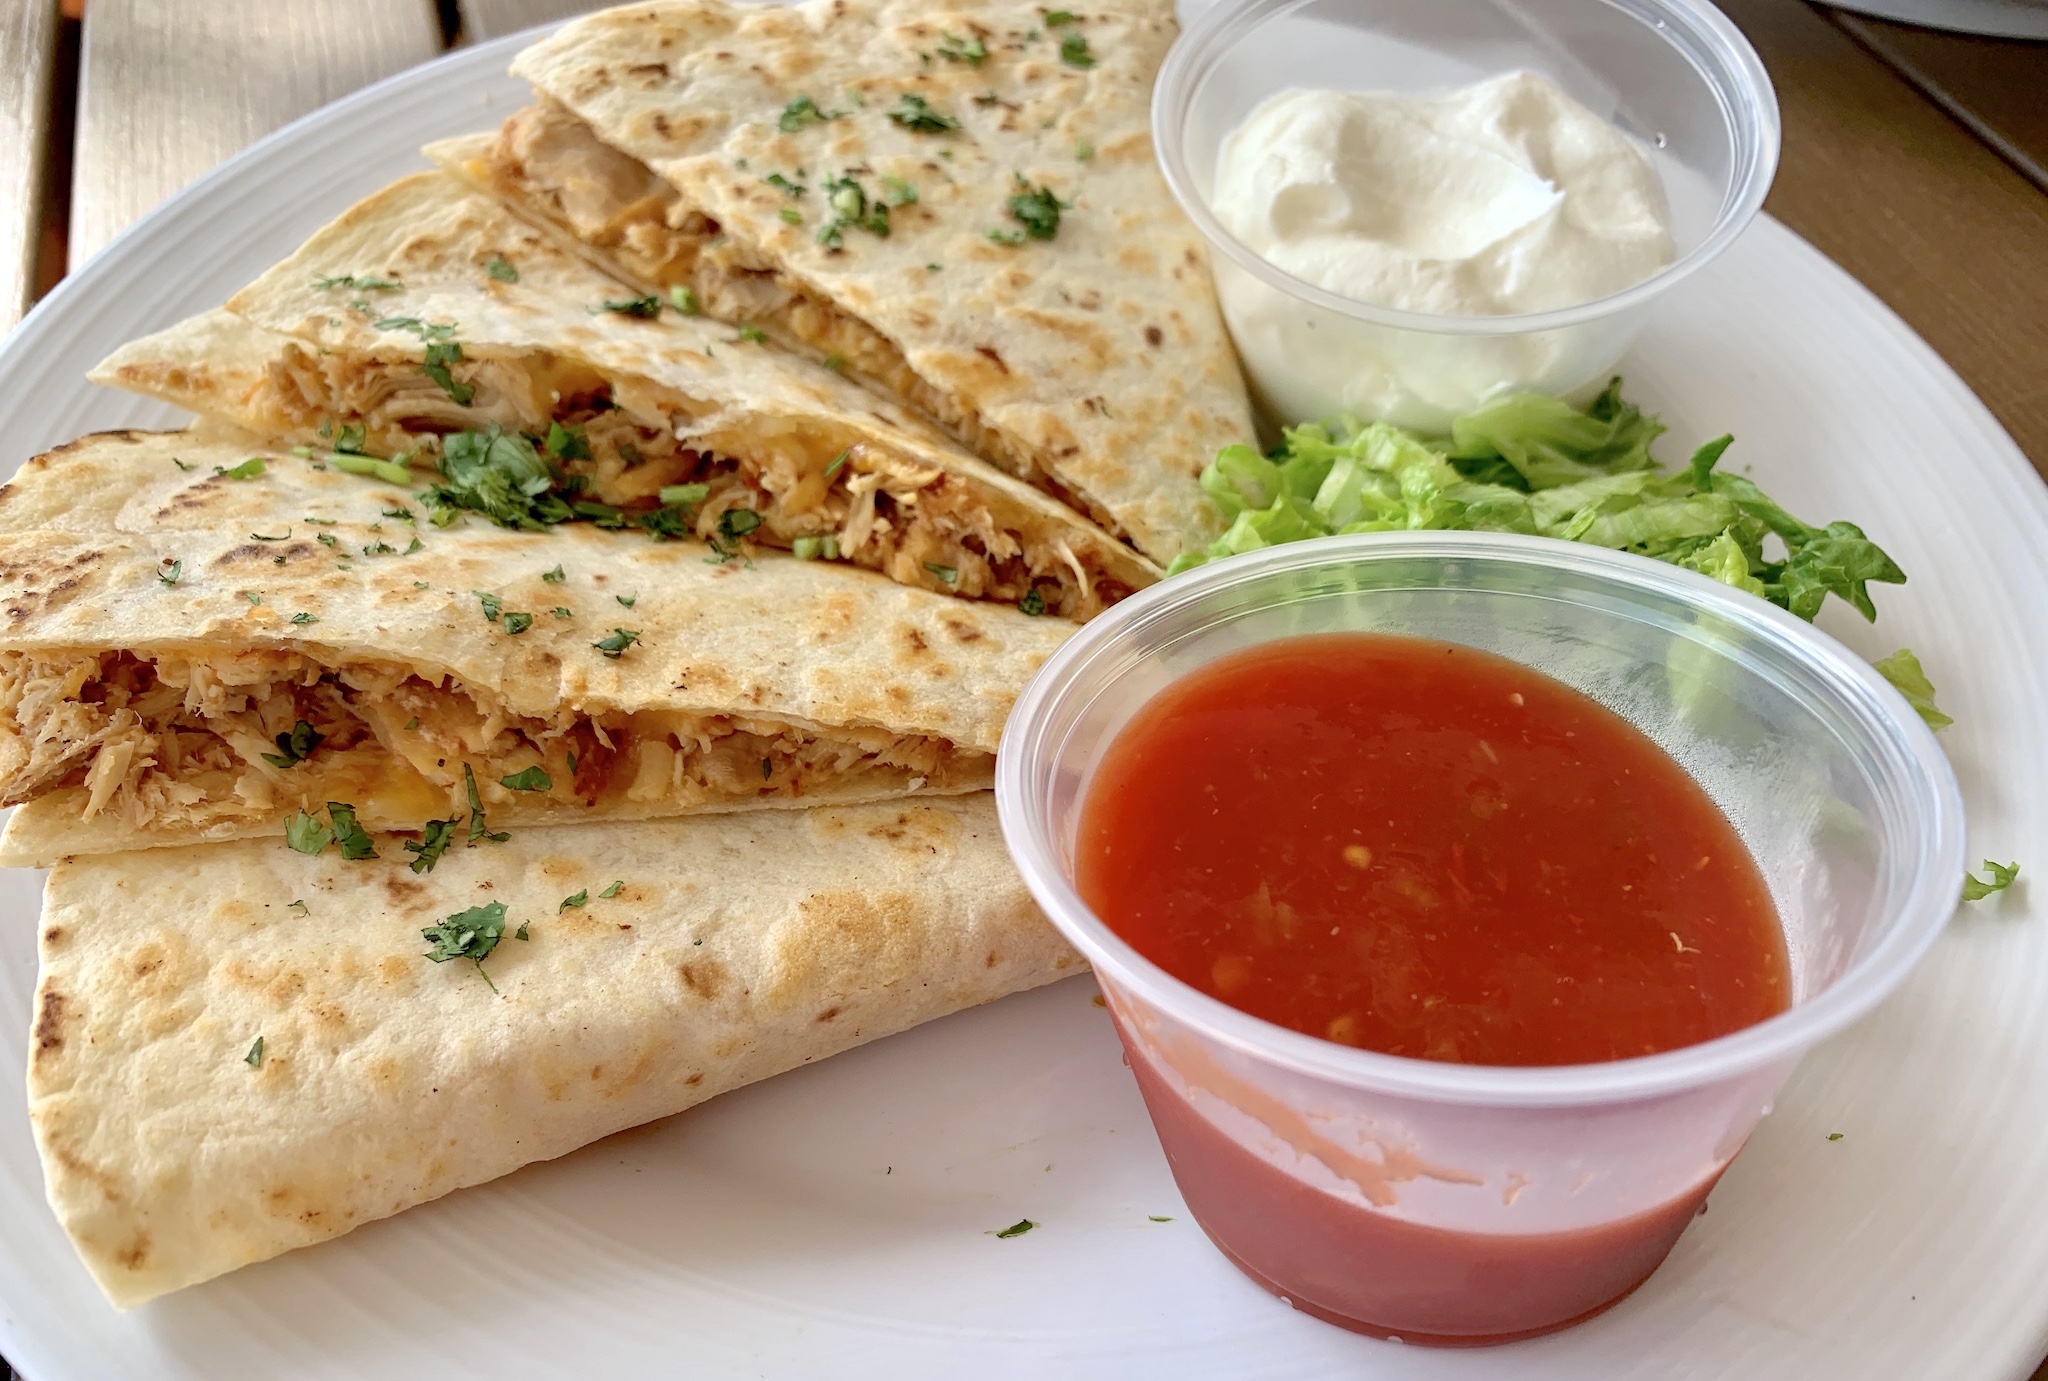 Rum Runners - Pulled Chicken Quesadilla - monterey jack and oaxaca cheese blend, fire-roasted salsa and sour cream